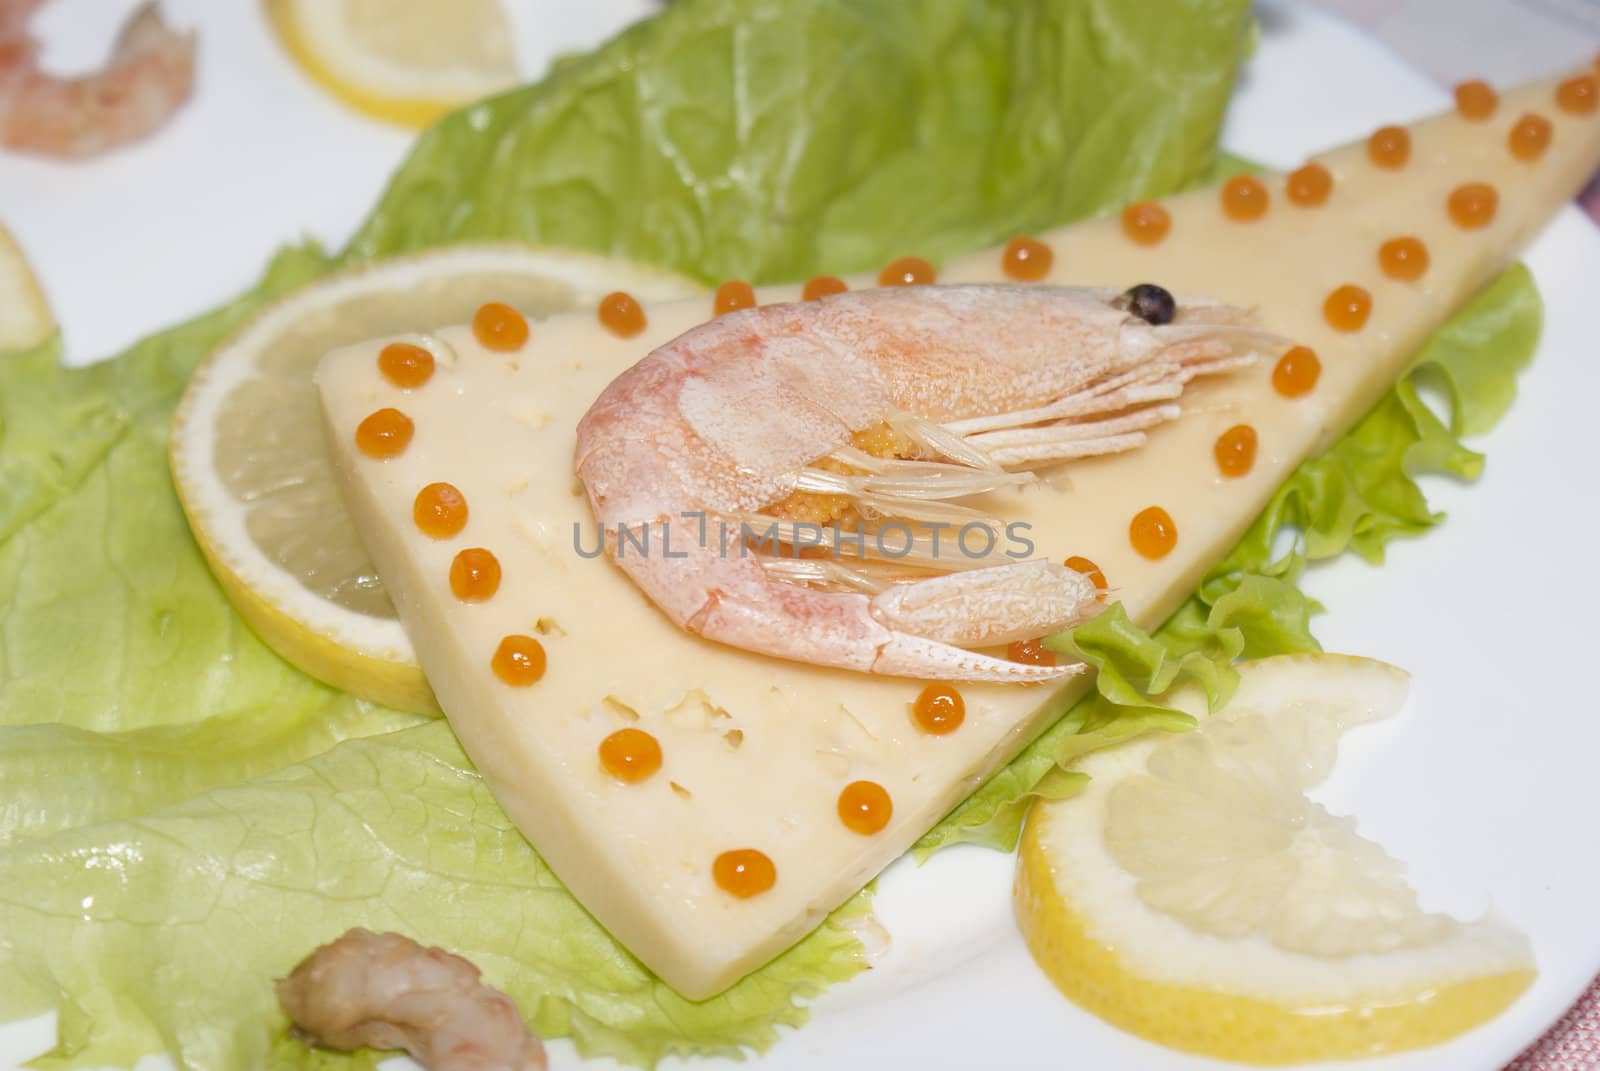 Sea shrimp on cheese with red caviar of a salmon and leaves of green salad.   Restaurant business